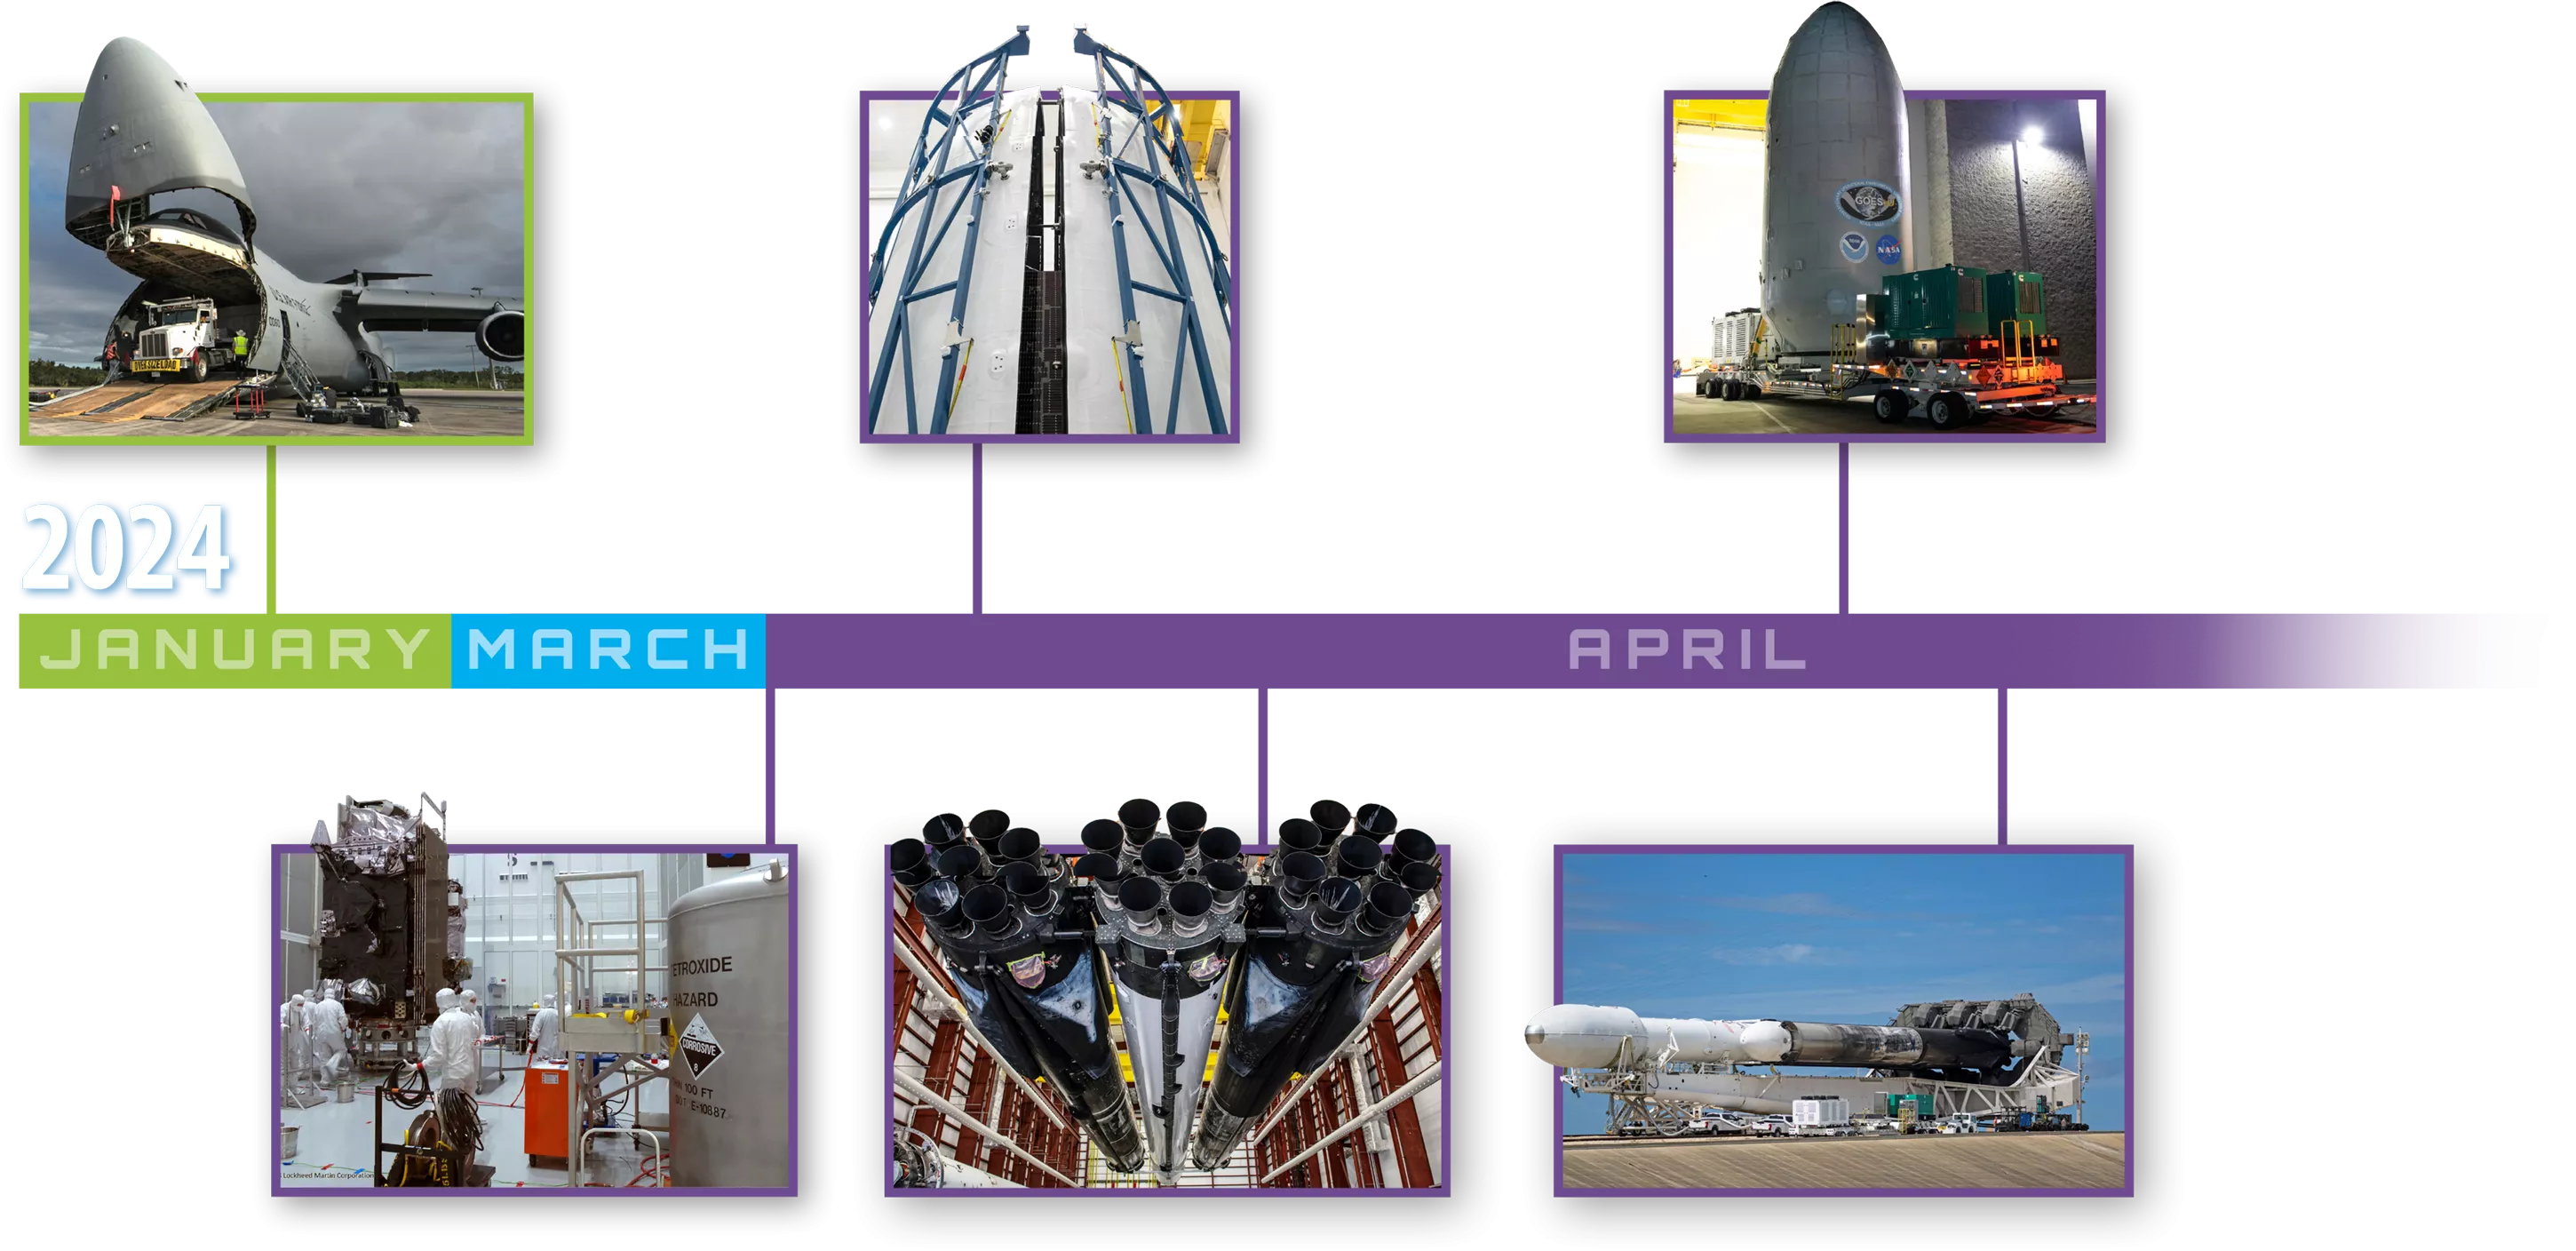 Image of the GOES-U satellite mounted on a rocket and a timeline showing the various steps leading up to a launch.